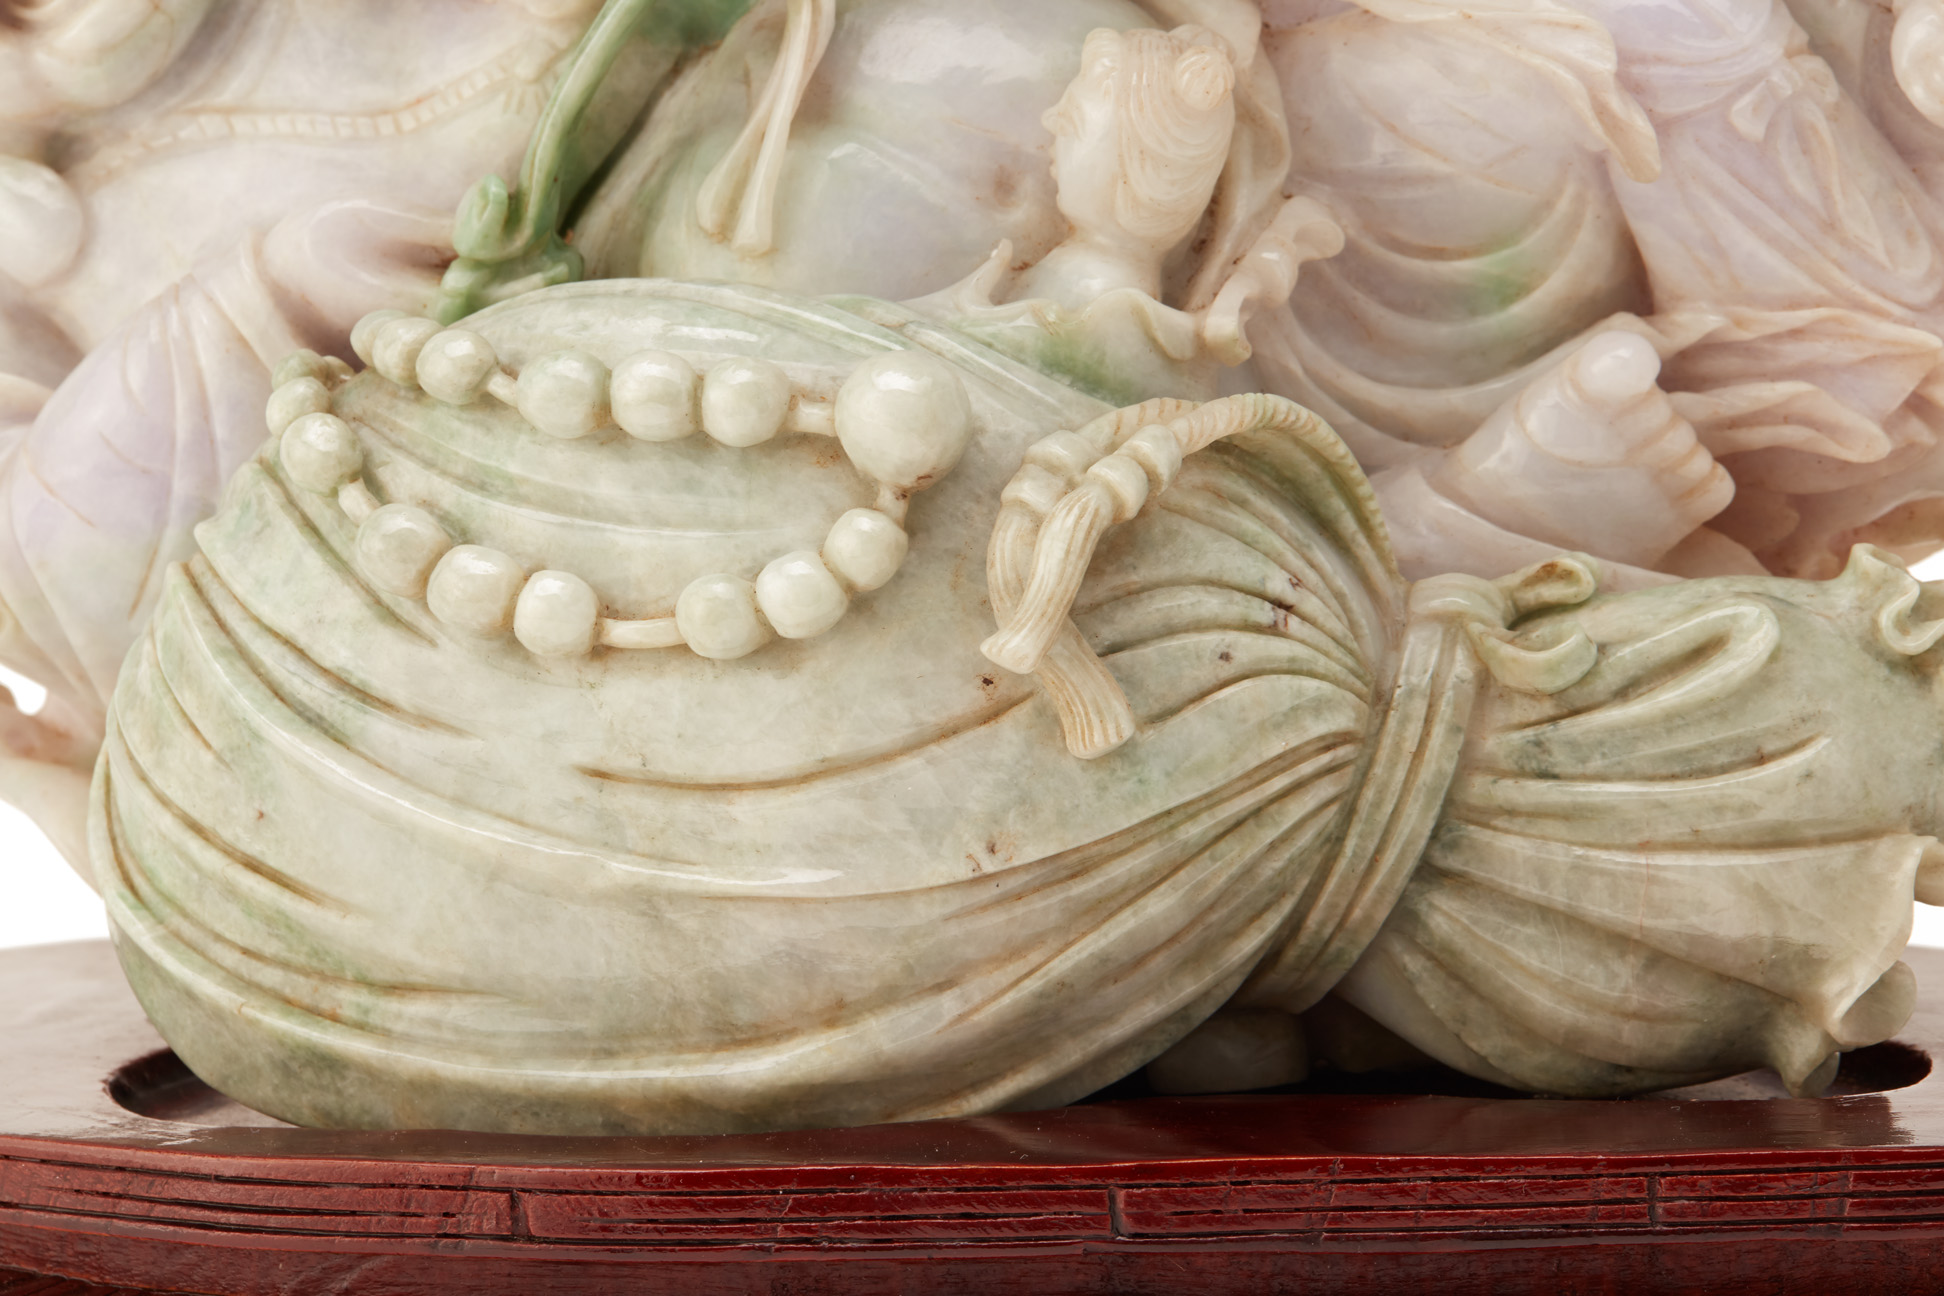 AN INTRICATE JADE CARVING OF BUDAI - Image 5 of 9